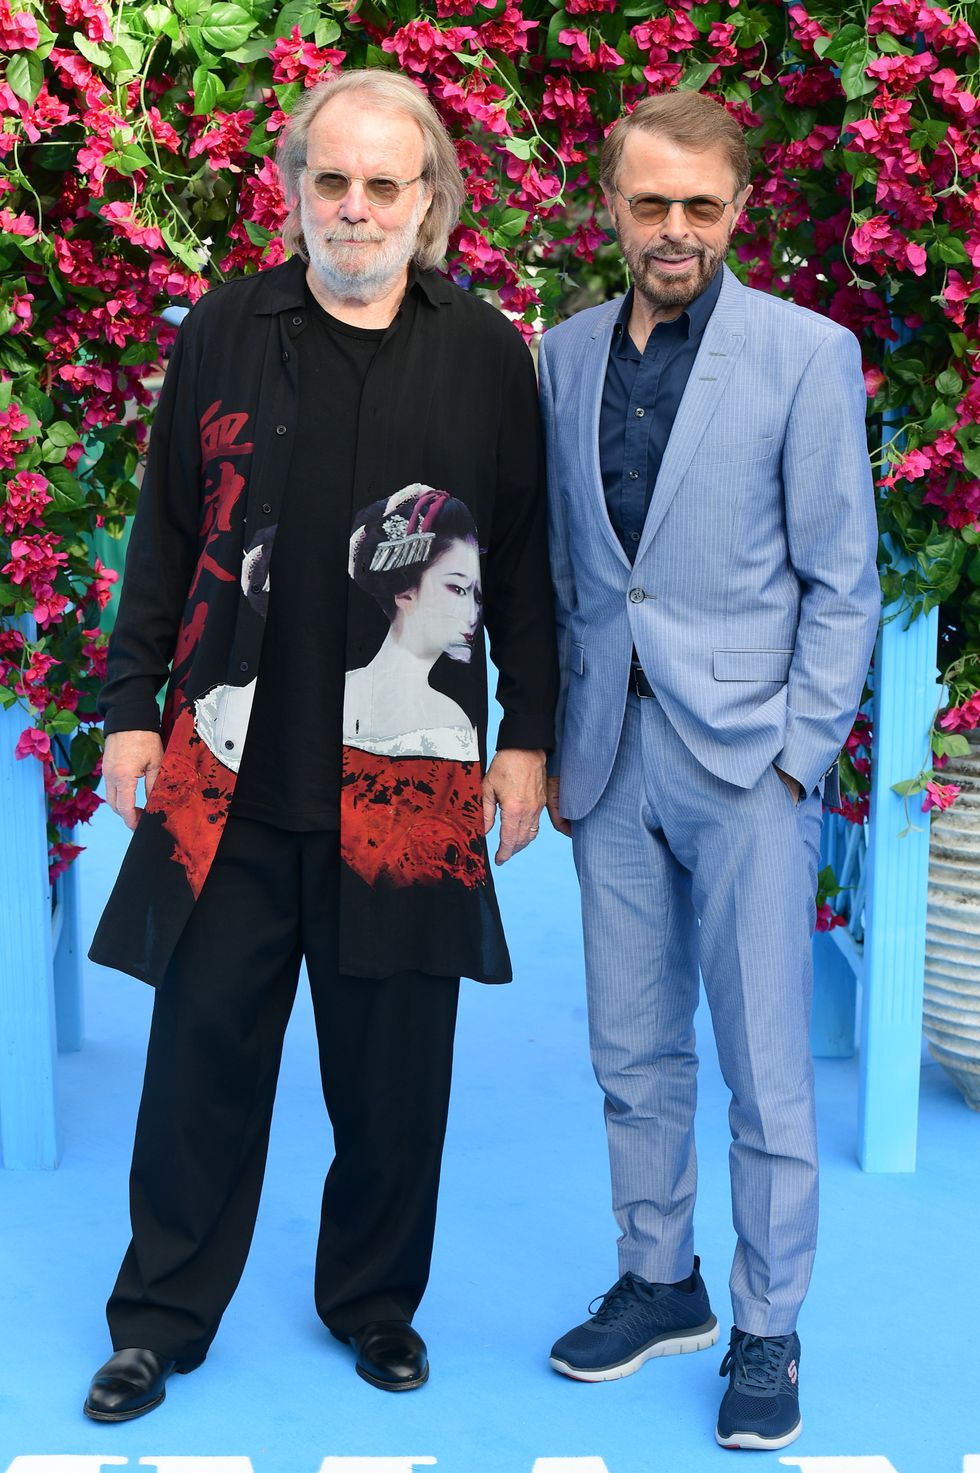 Benny Andersson and Bjorn Ulvaeus at the premiere of Mamma Mia! Here We Go Again in London (Ian West/PA)